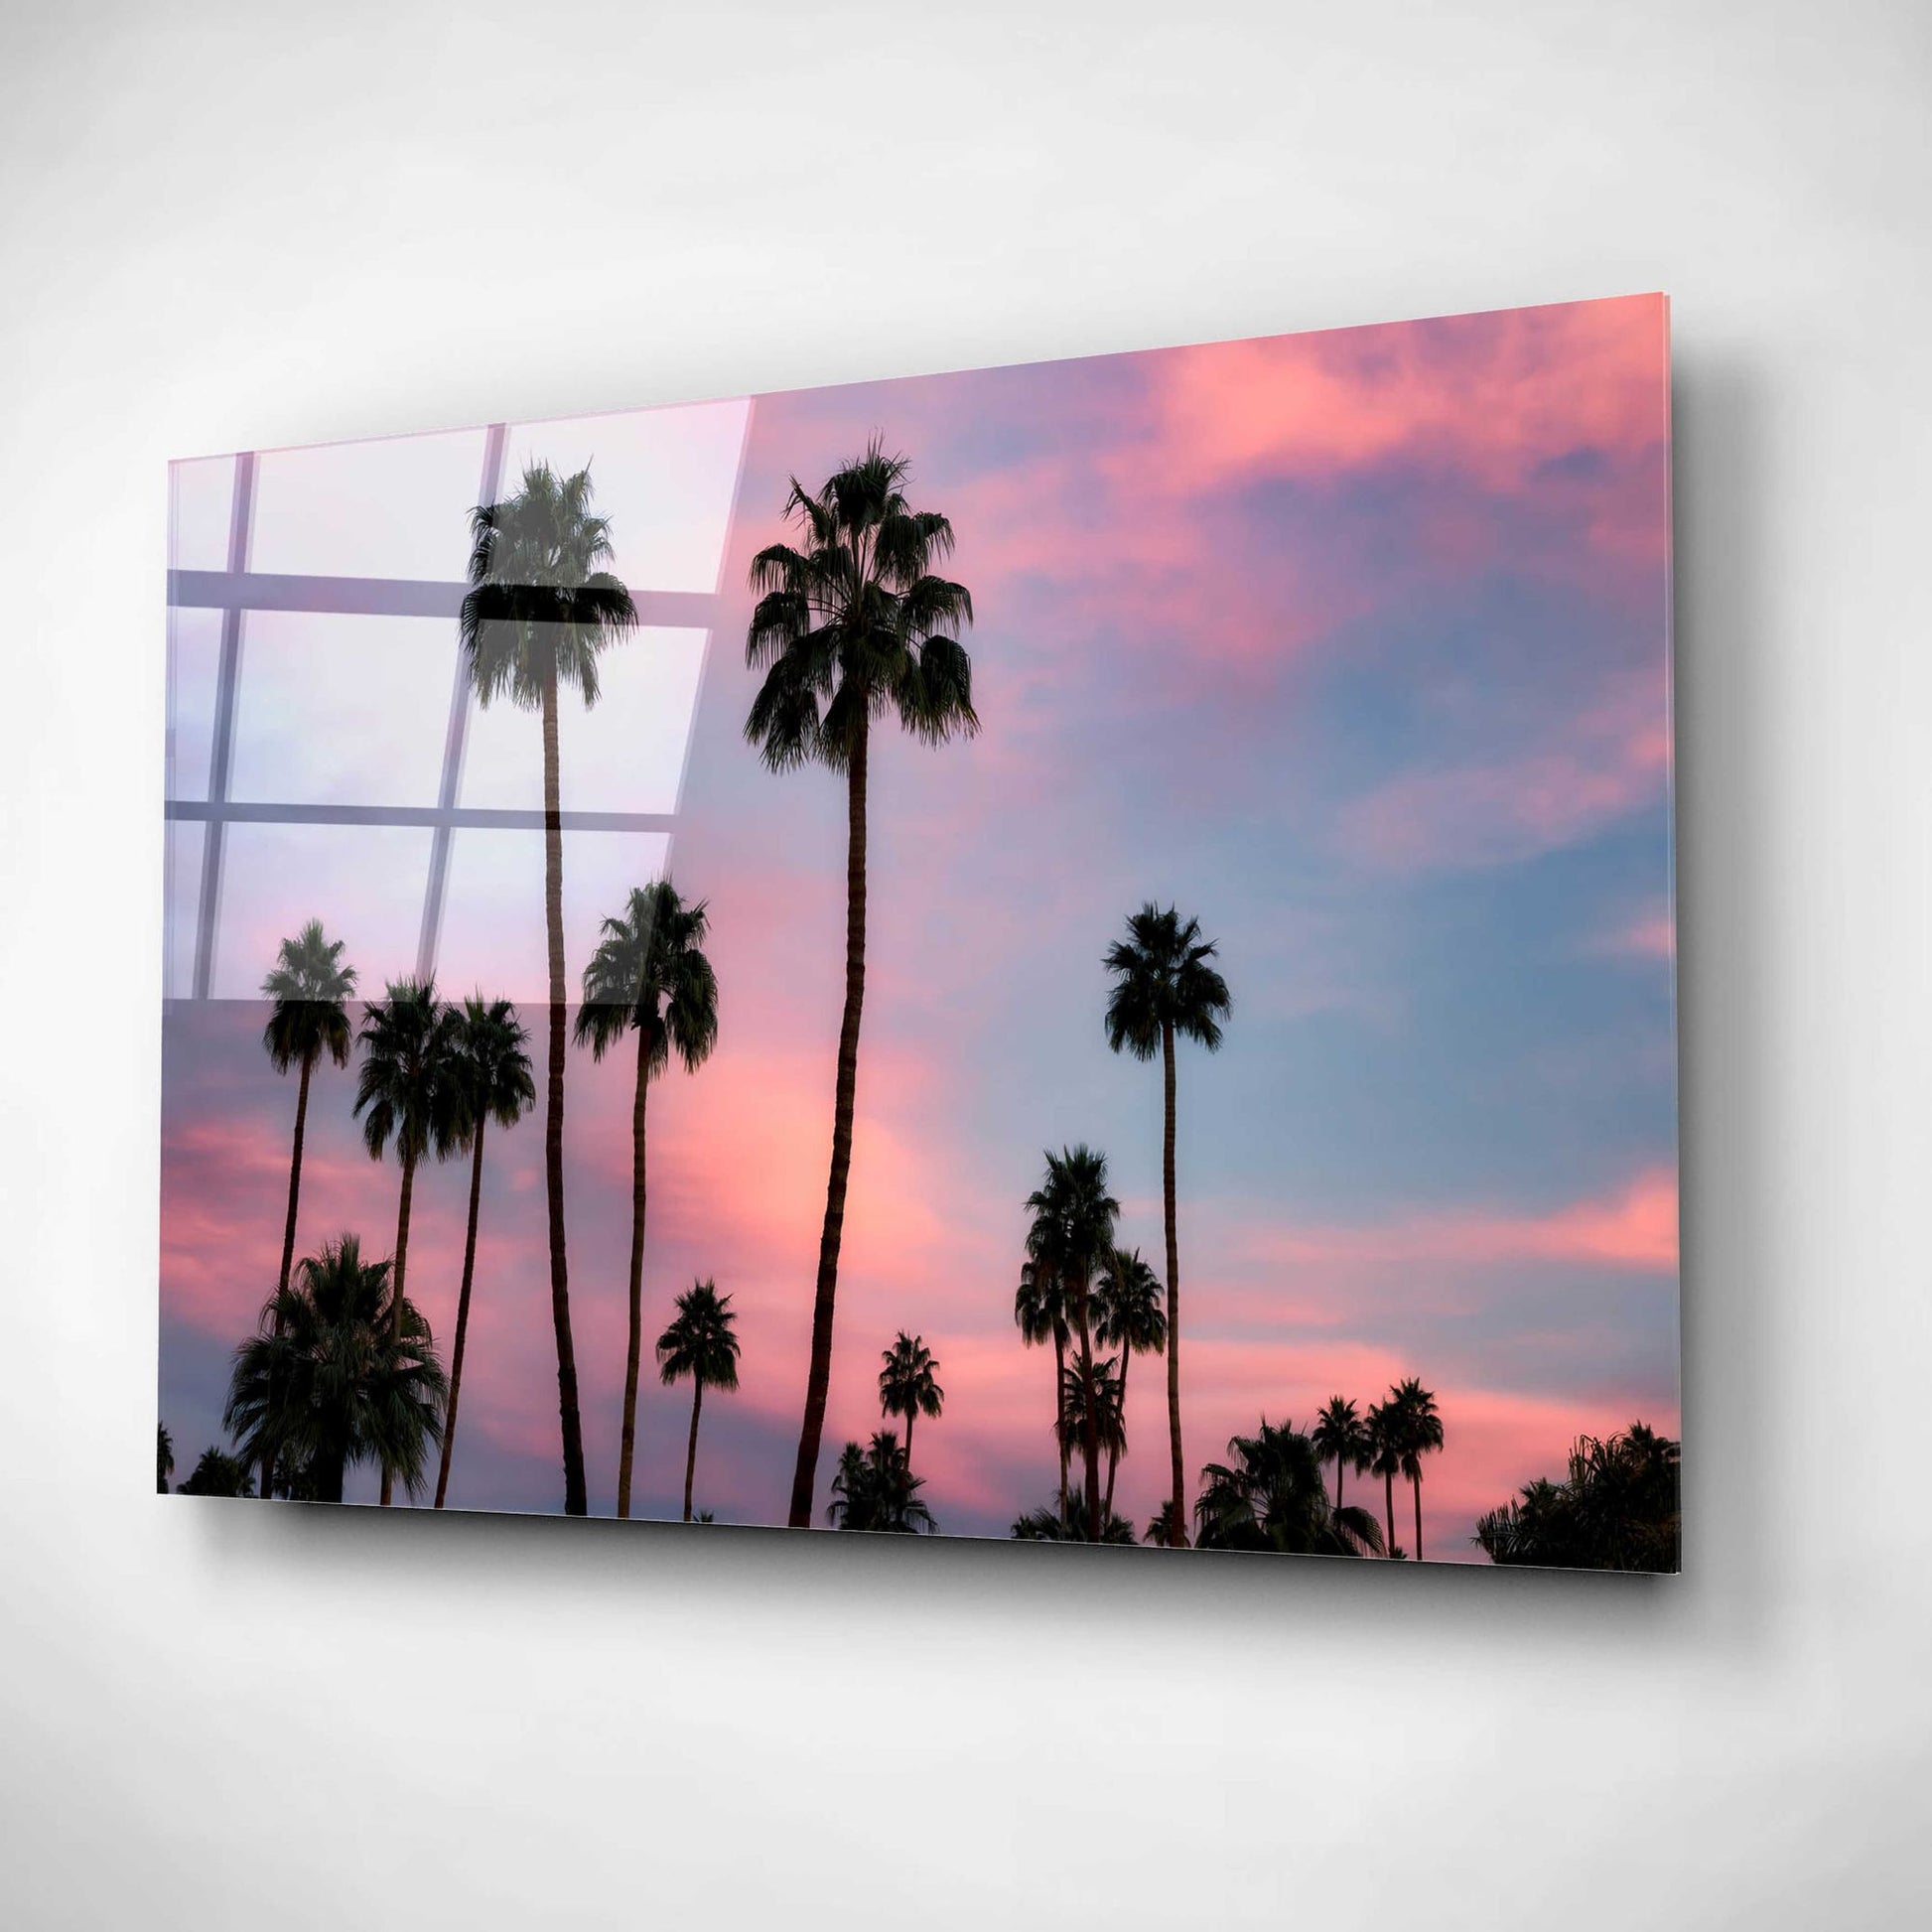 Epic Art 'Palm Sunset' by Dennis Frates, Acrylic Glass Wall Art,16x12